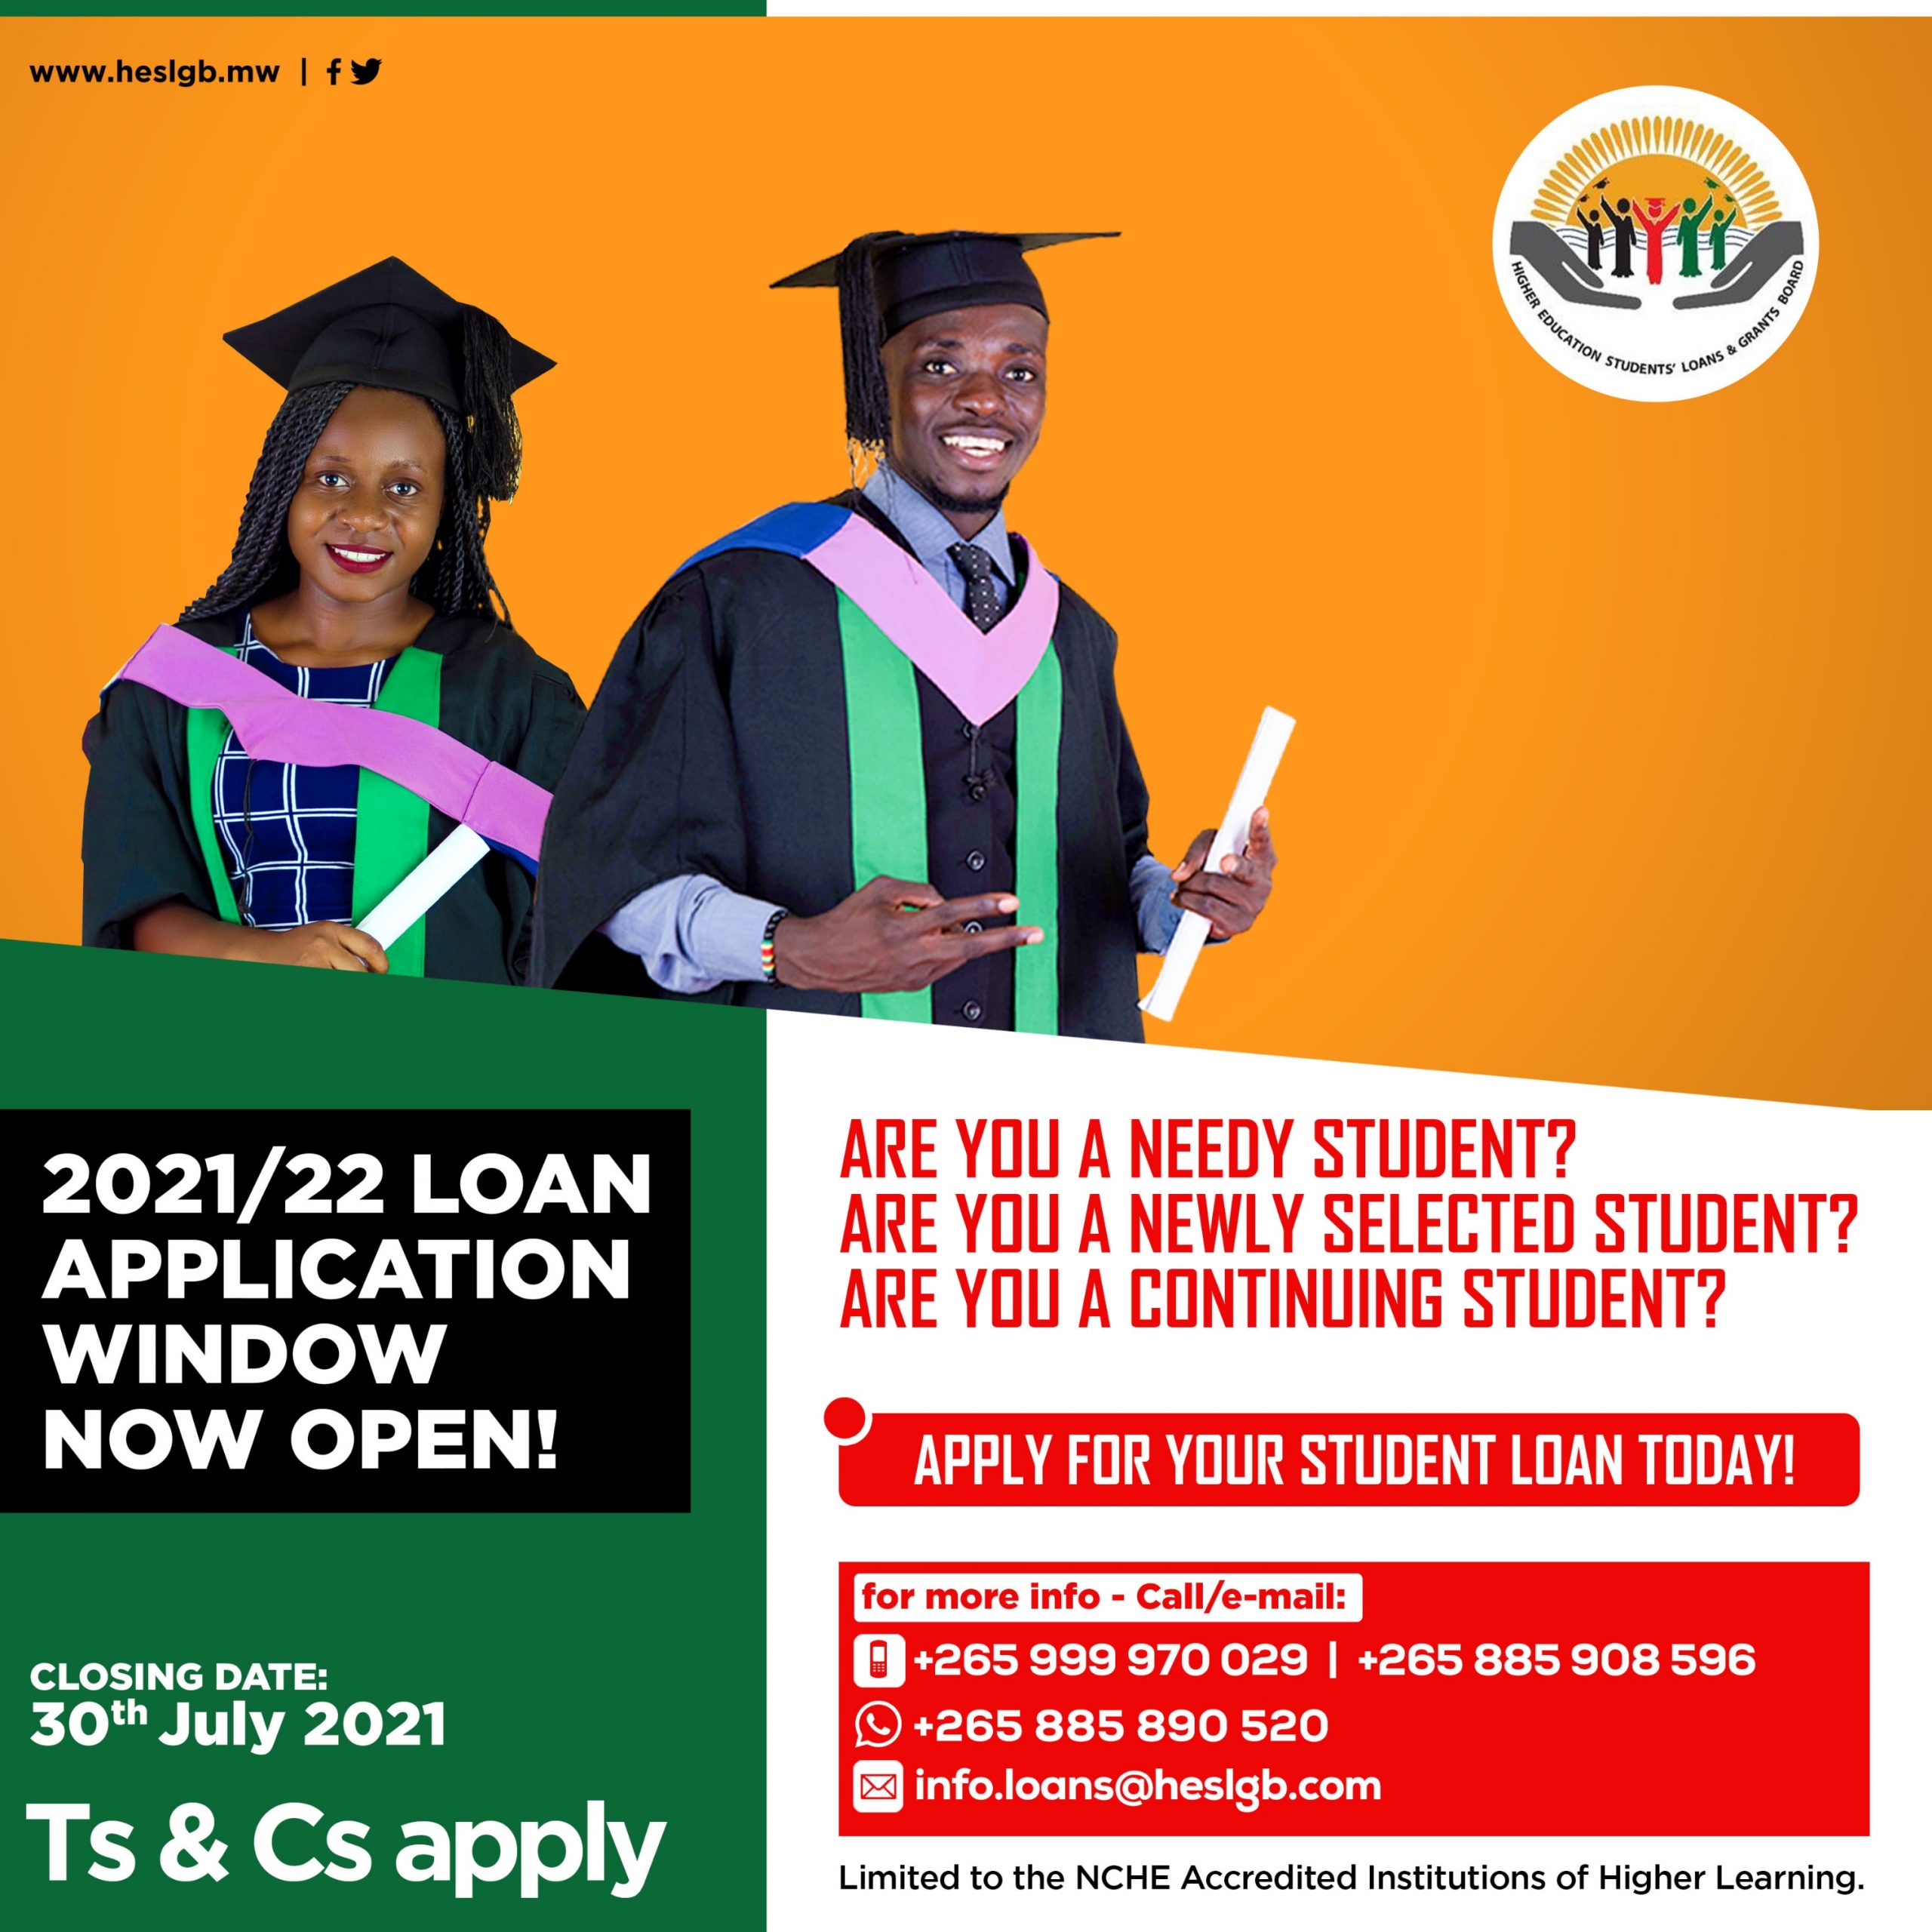 HESLGB Opens Student Loans Application Window for 2021/2022